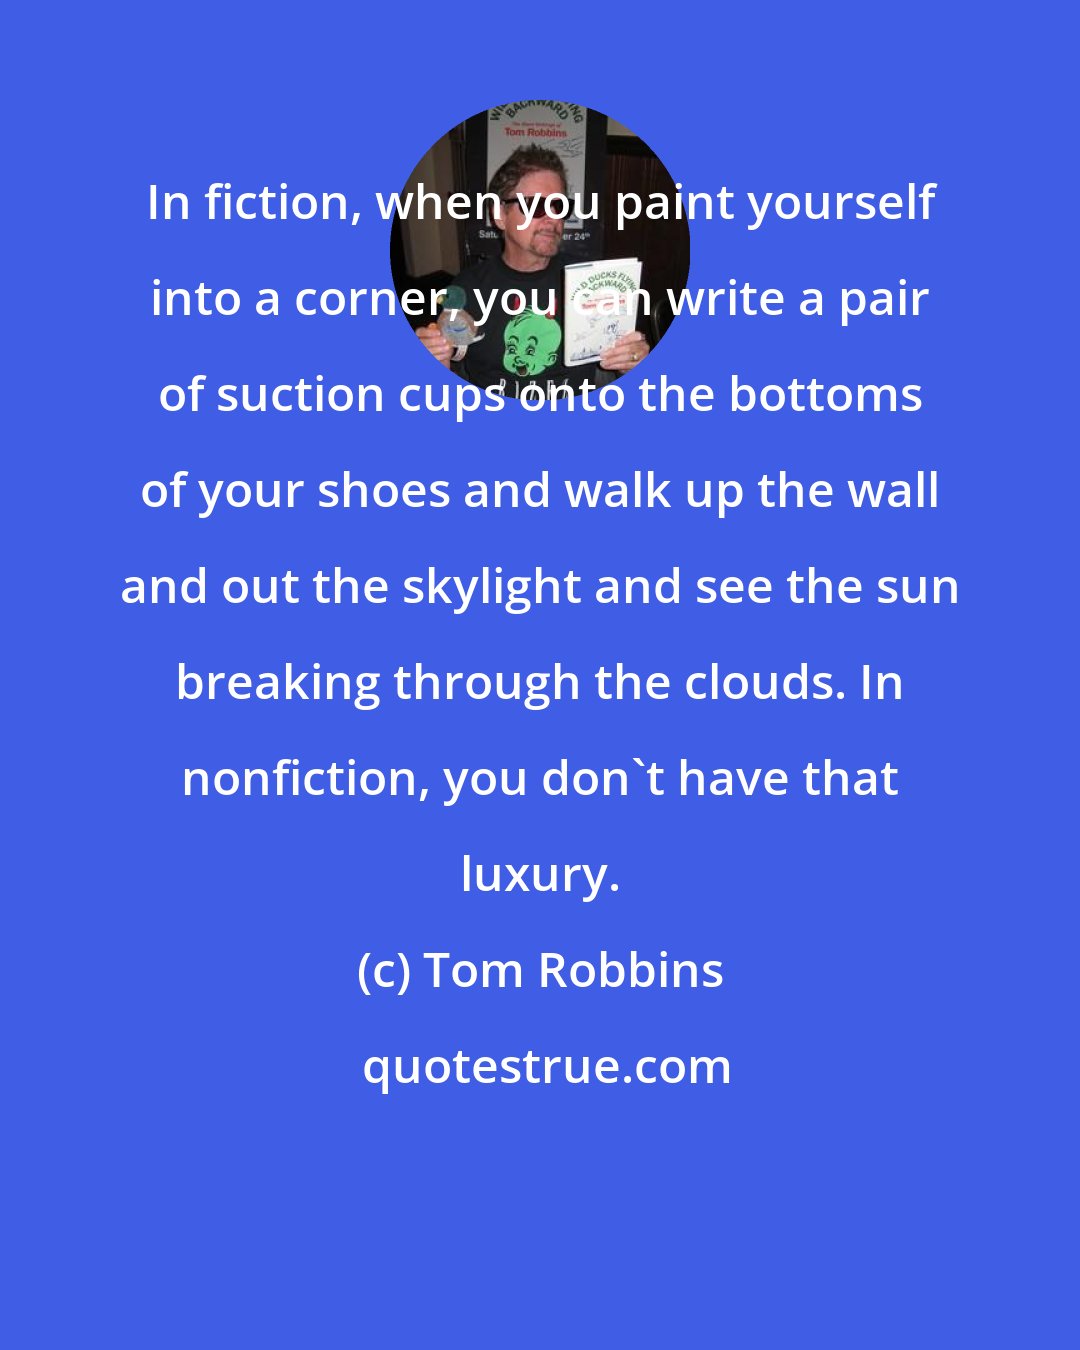 Tom Robbins: In fiction, when you paint yourself into a corner, you can write a pair of suction cups onto the bottoms of your shoes and walk up the wall and out the skylight and see the sun breaking through the clouds. In nonfiction, you don't have that luxury.